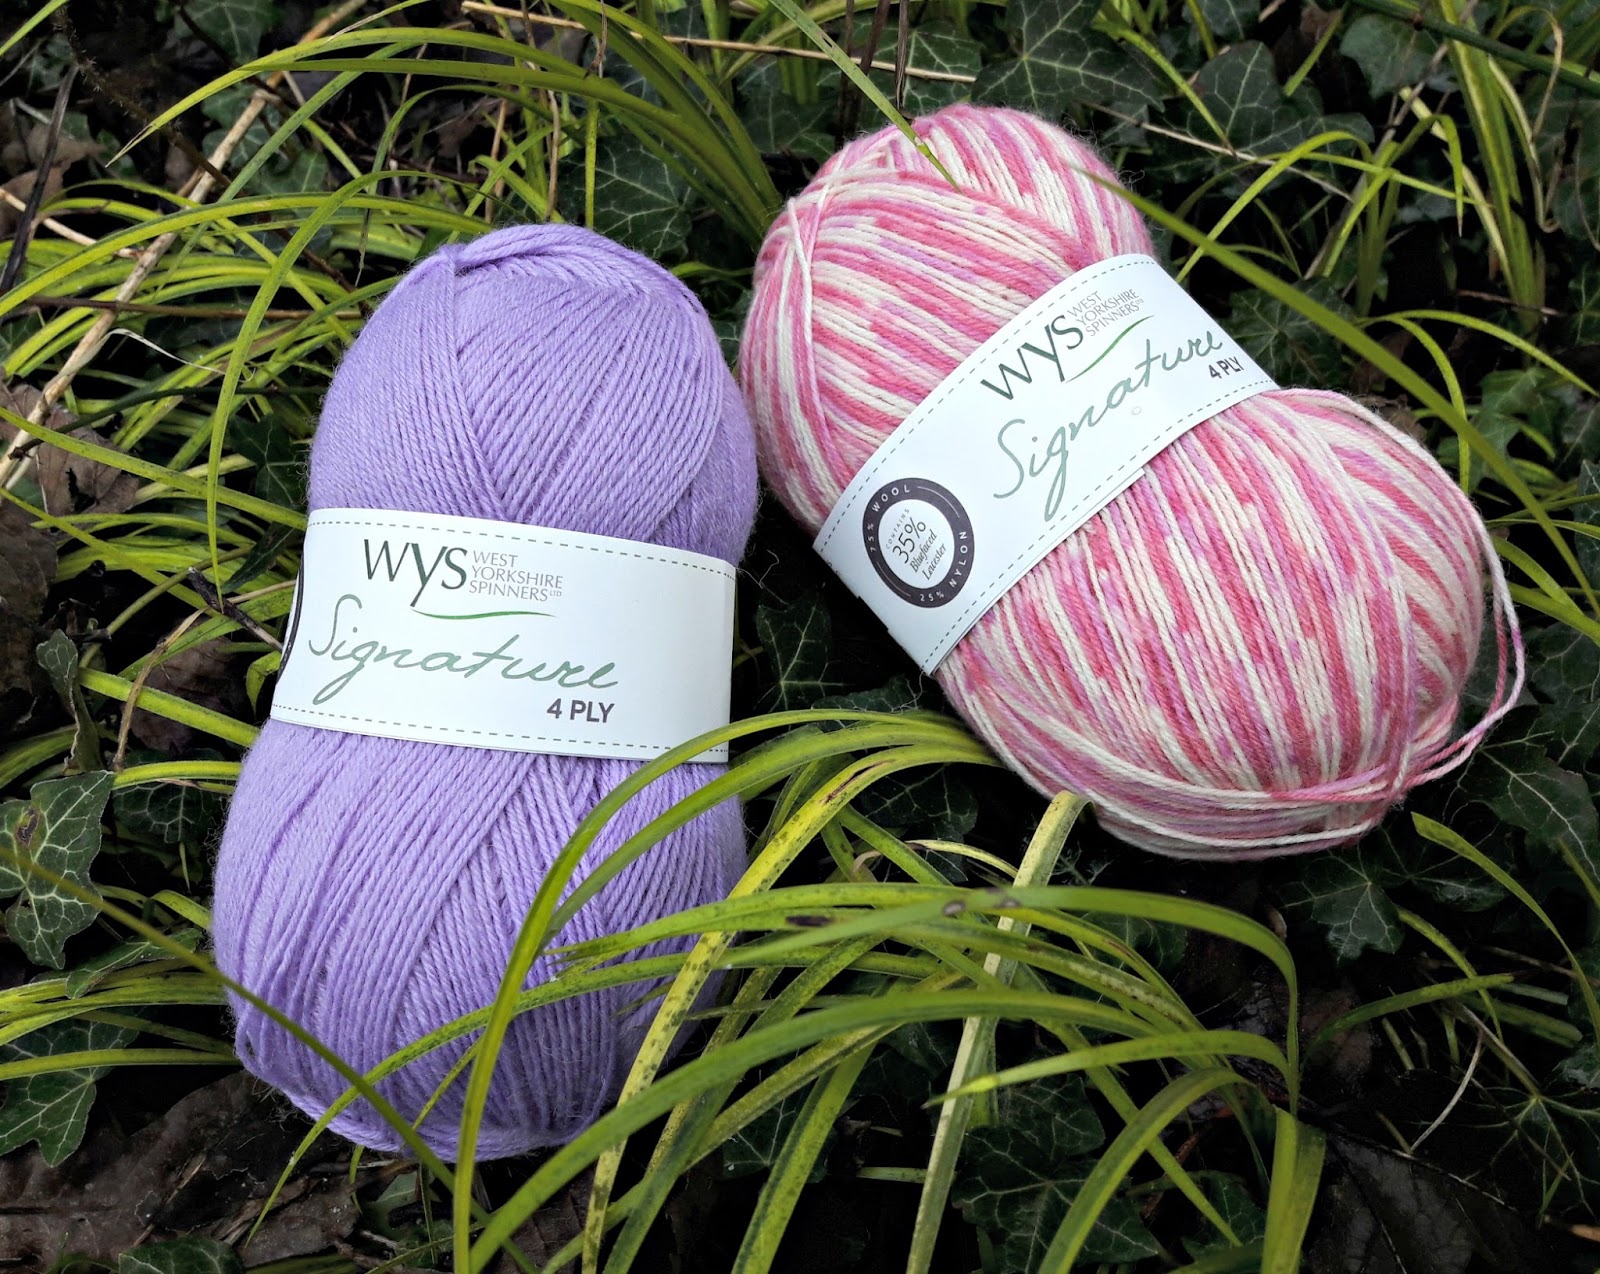 YARN, Exactly, that's exactly what I was thinking!